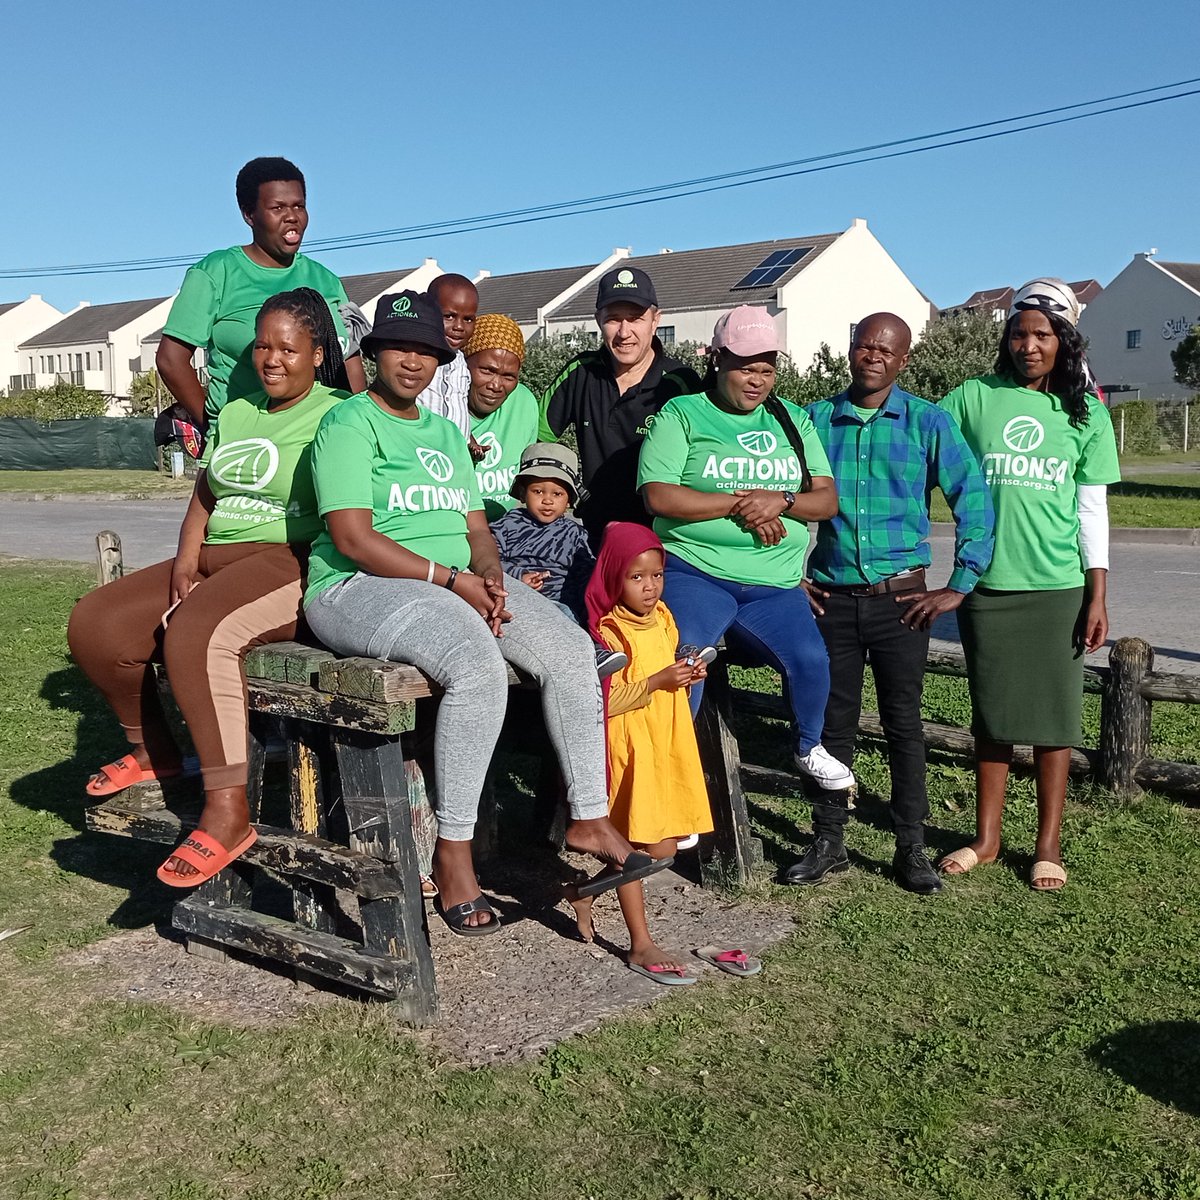 Today we had a Port Alfred team-building braai and planning session for the branch launches of Ndlambe wards 7,8,9 on Saturday 8 July. This team is growing stronger and stronger @AtholT 💚🙏🏽🇿🇦 @ActionSA_SarahB @ActionSA_EC @Action4SA #LetsFixSouthAfrica